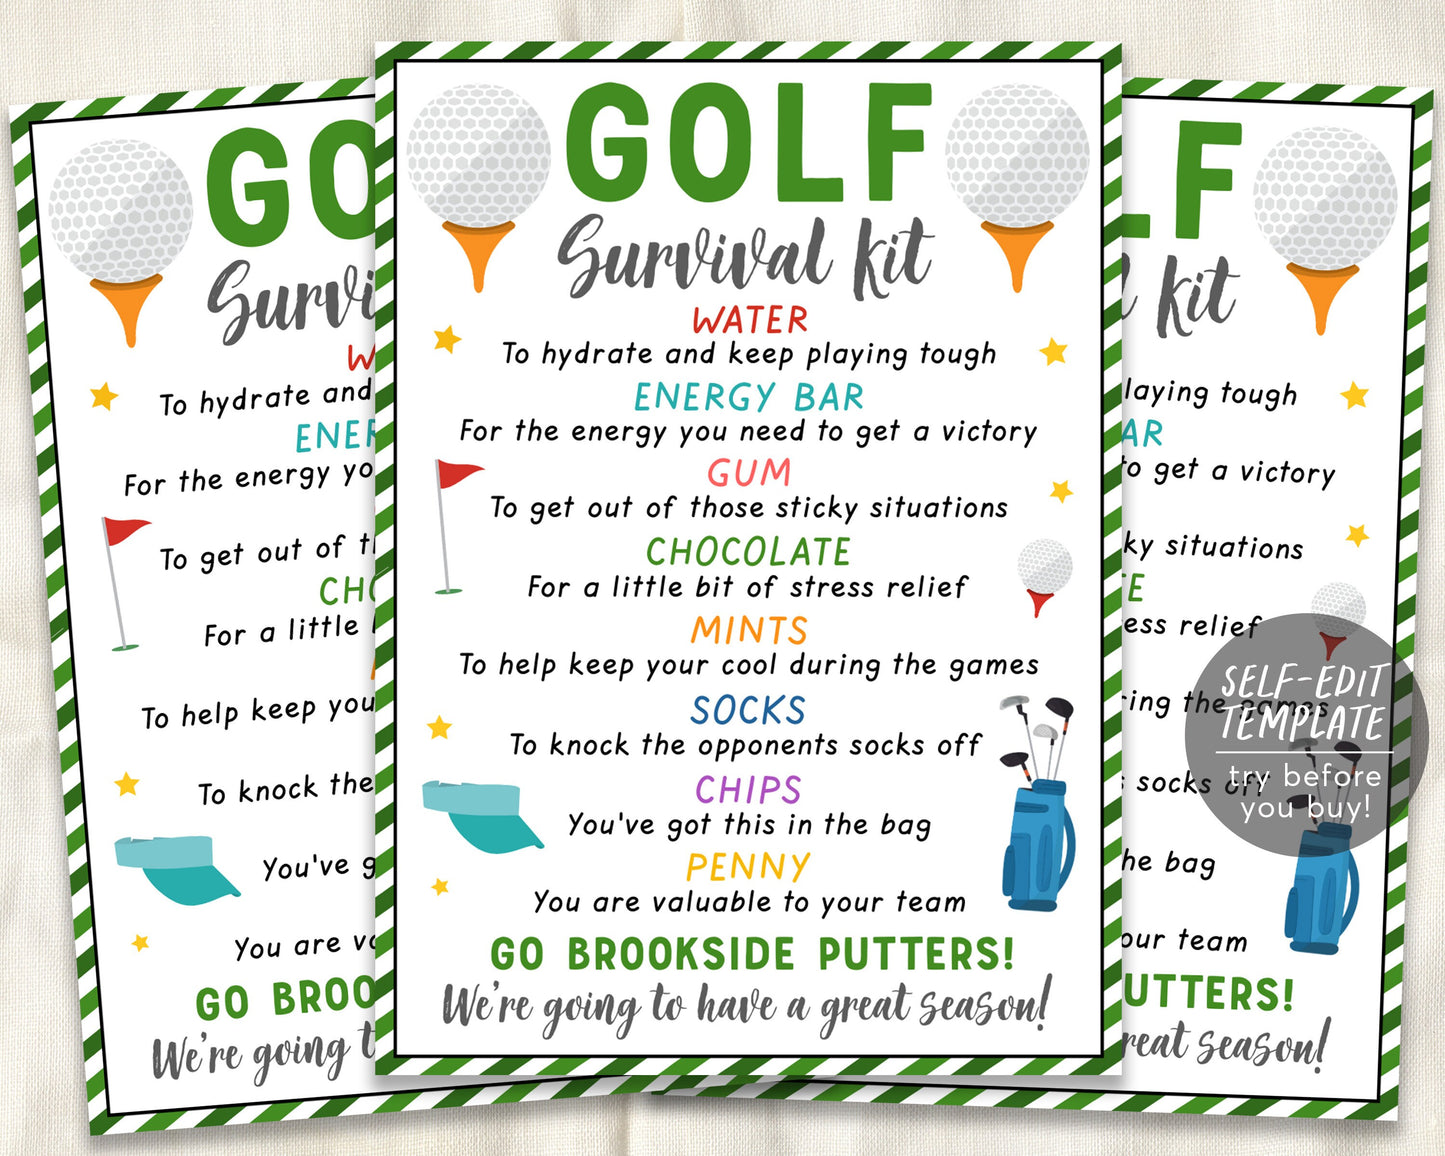 Golf Survival Kit Gift Tags Editable Template, Golfer Player Team Gift Idea, Golf Camp Tryouts Sports Snack Treat Tags Team Appreciation